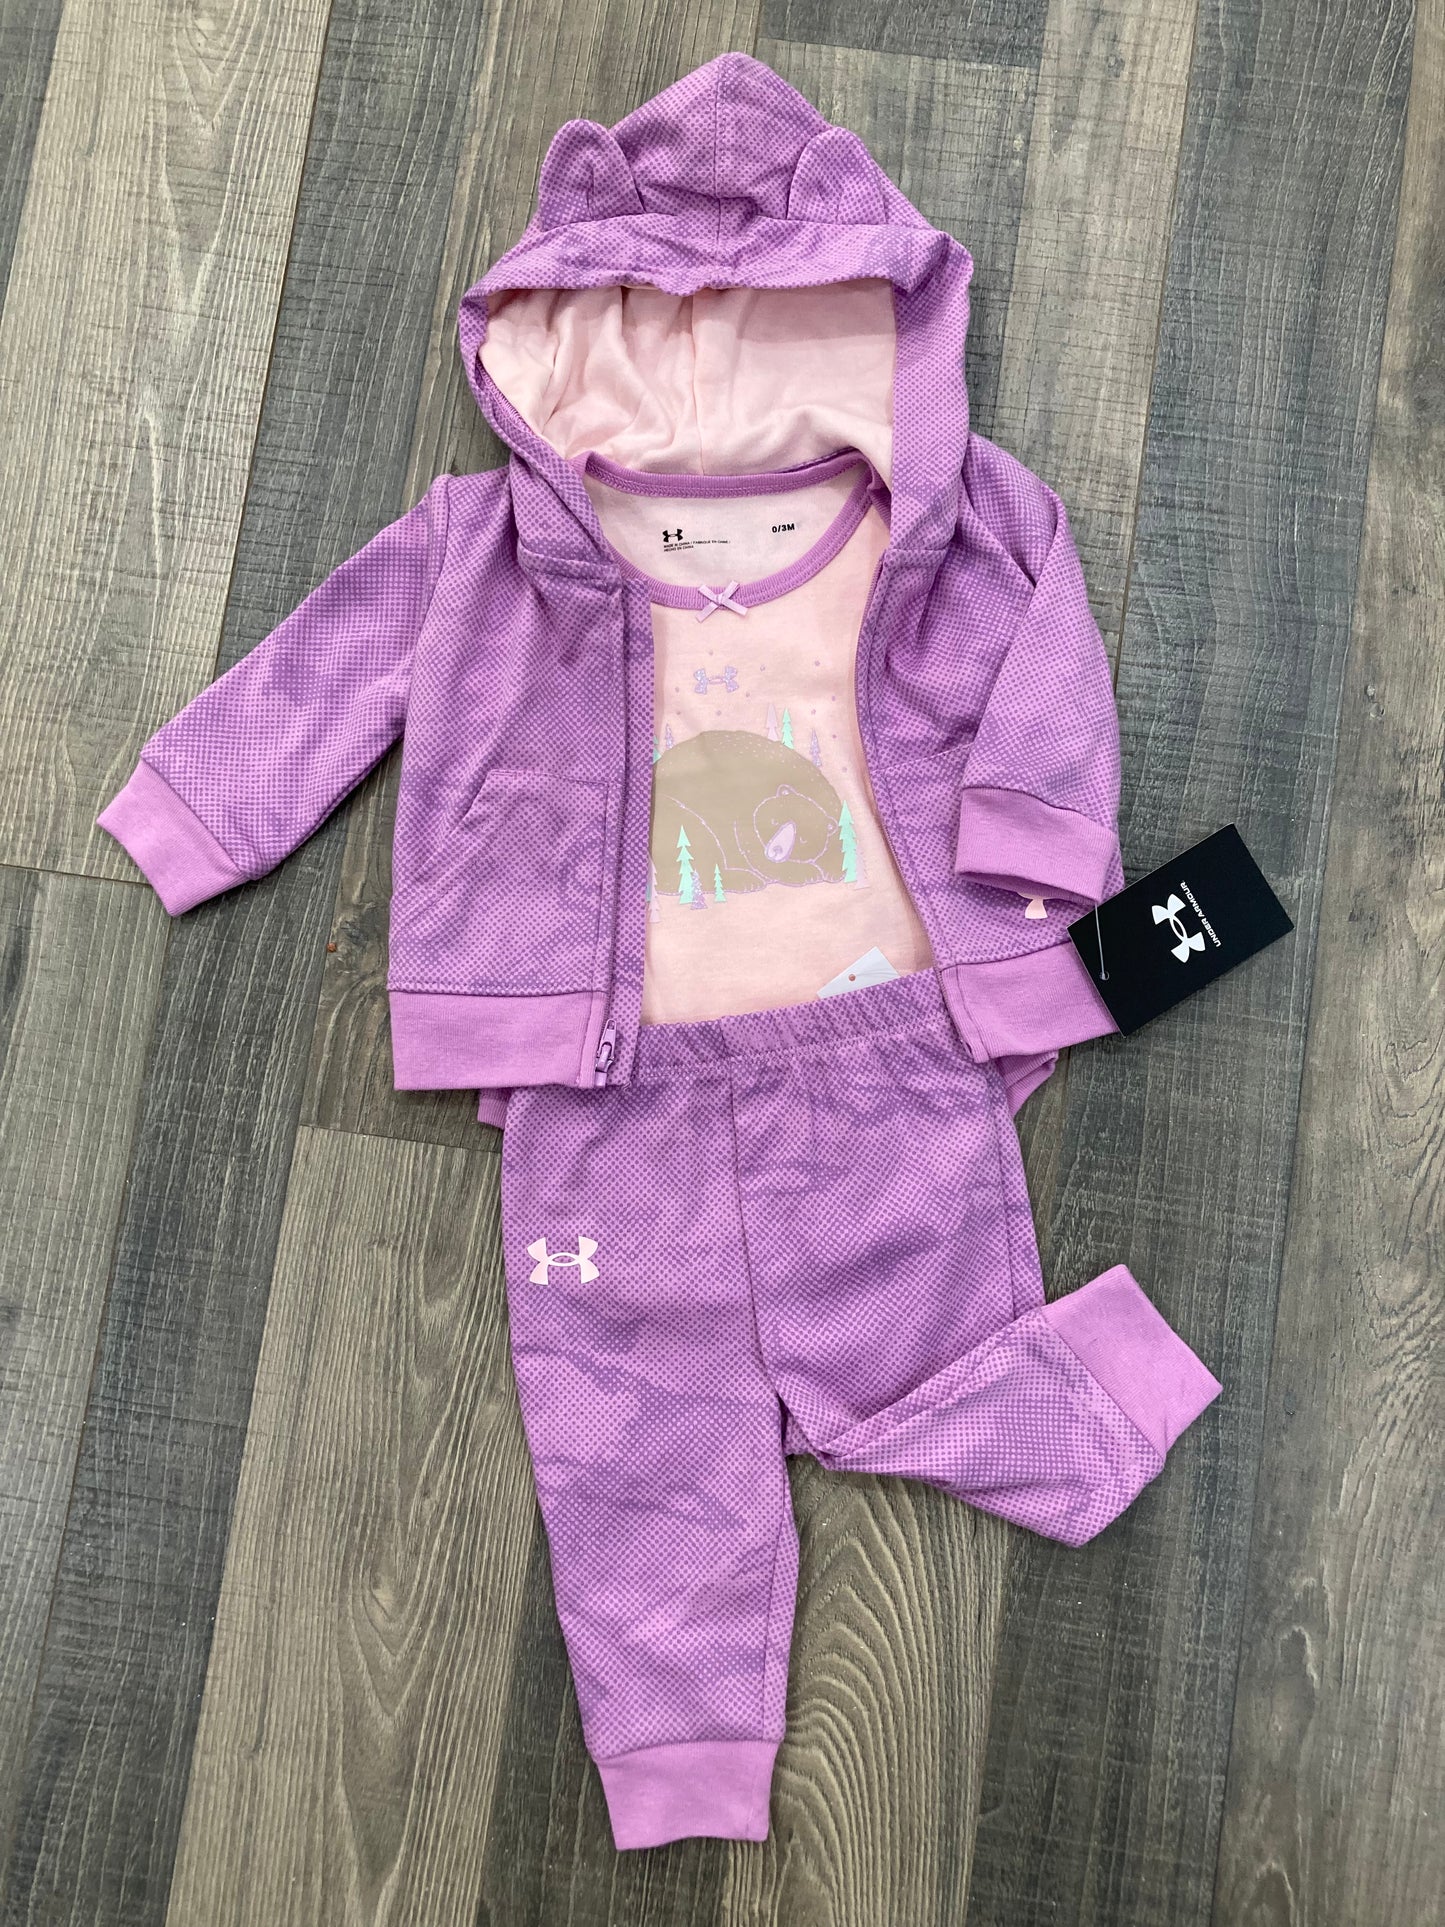 Under Armour Pacific Purple Infant Set with Onesie